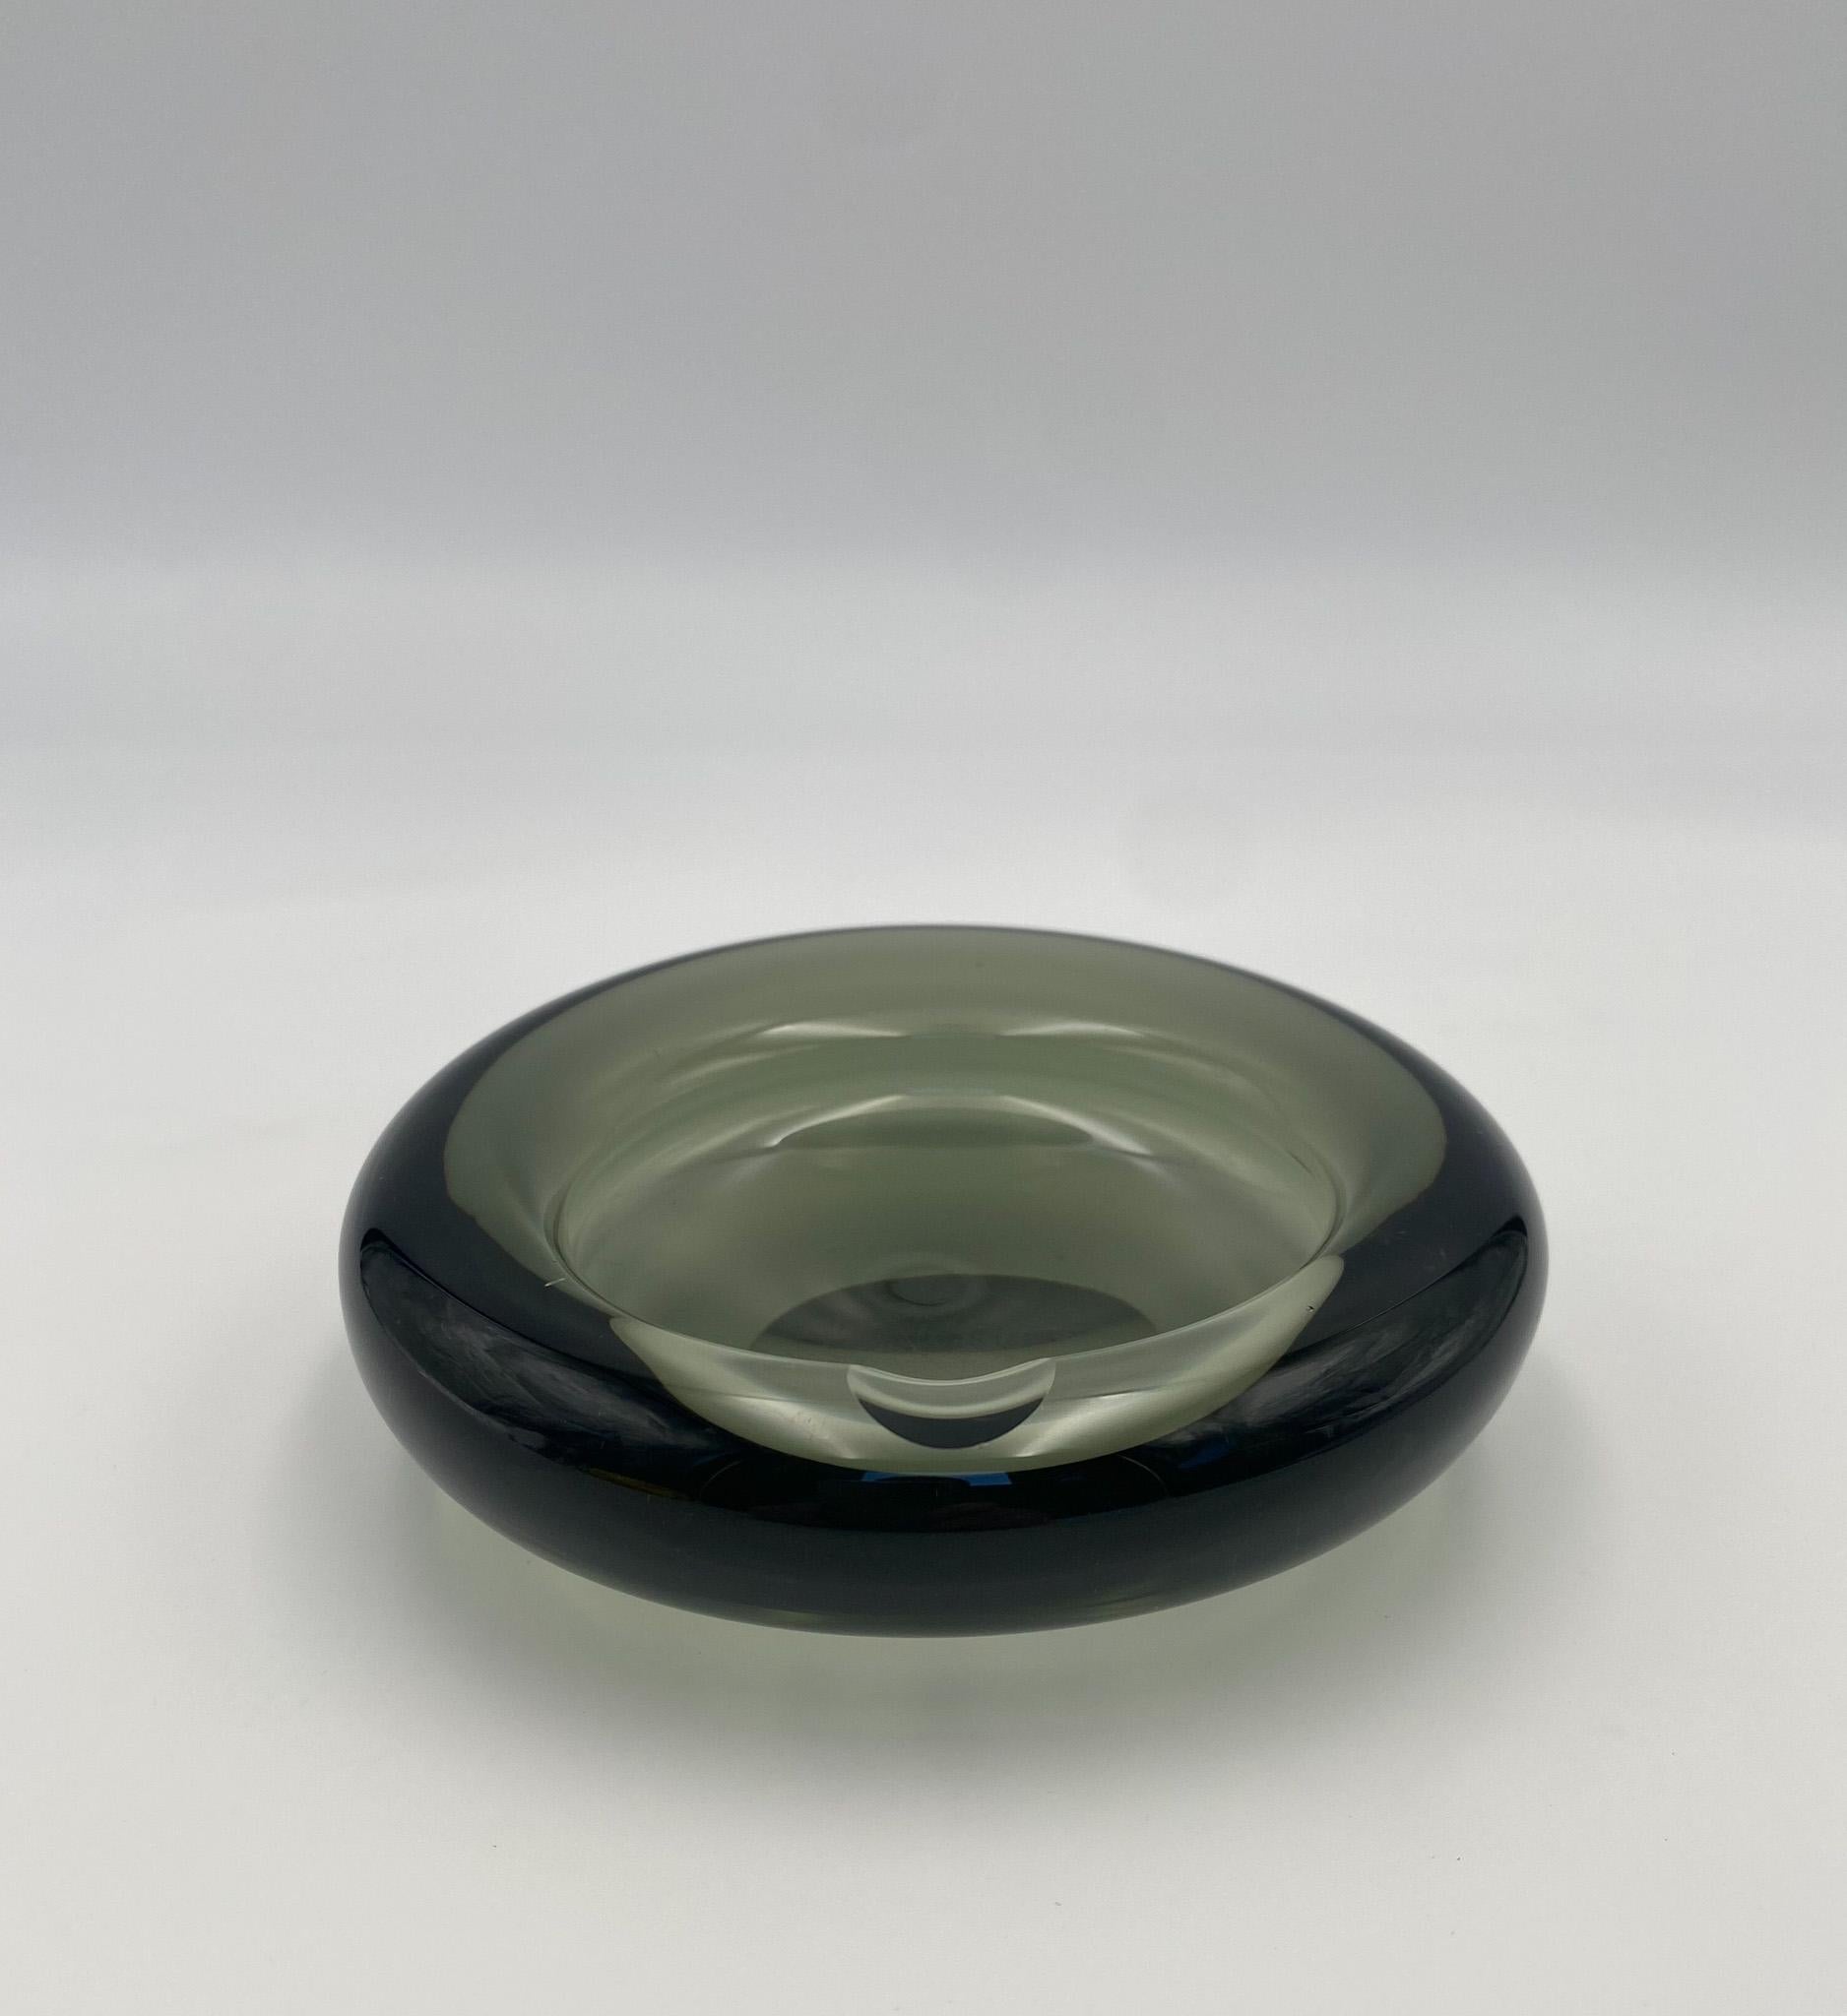 Per Lütken Modernist Smoked Glass Ashtray / Bowl for Holmegaard, Denmark, 1960's.  This piece is signed to the bottom.  